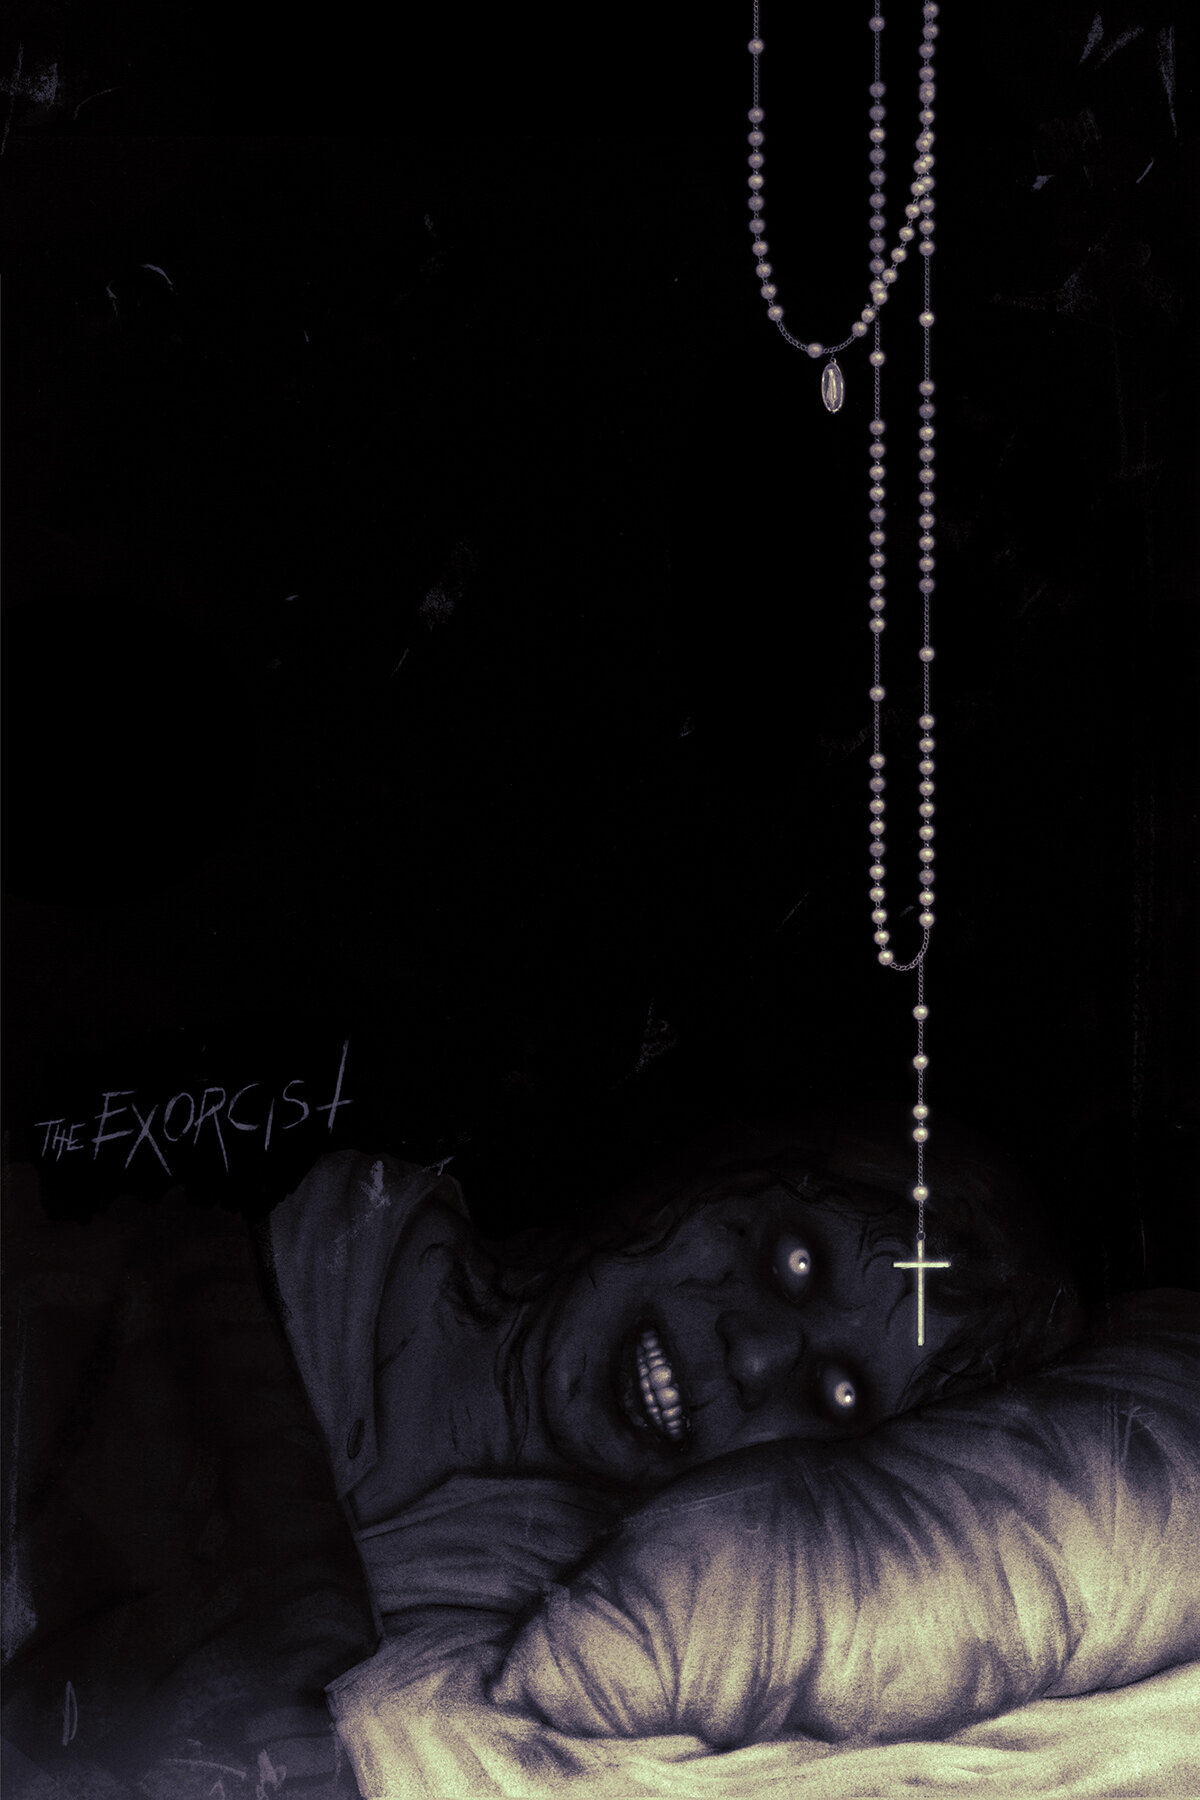 'The Exorcist' Poster